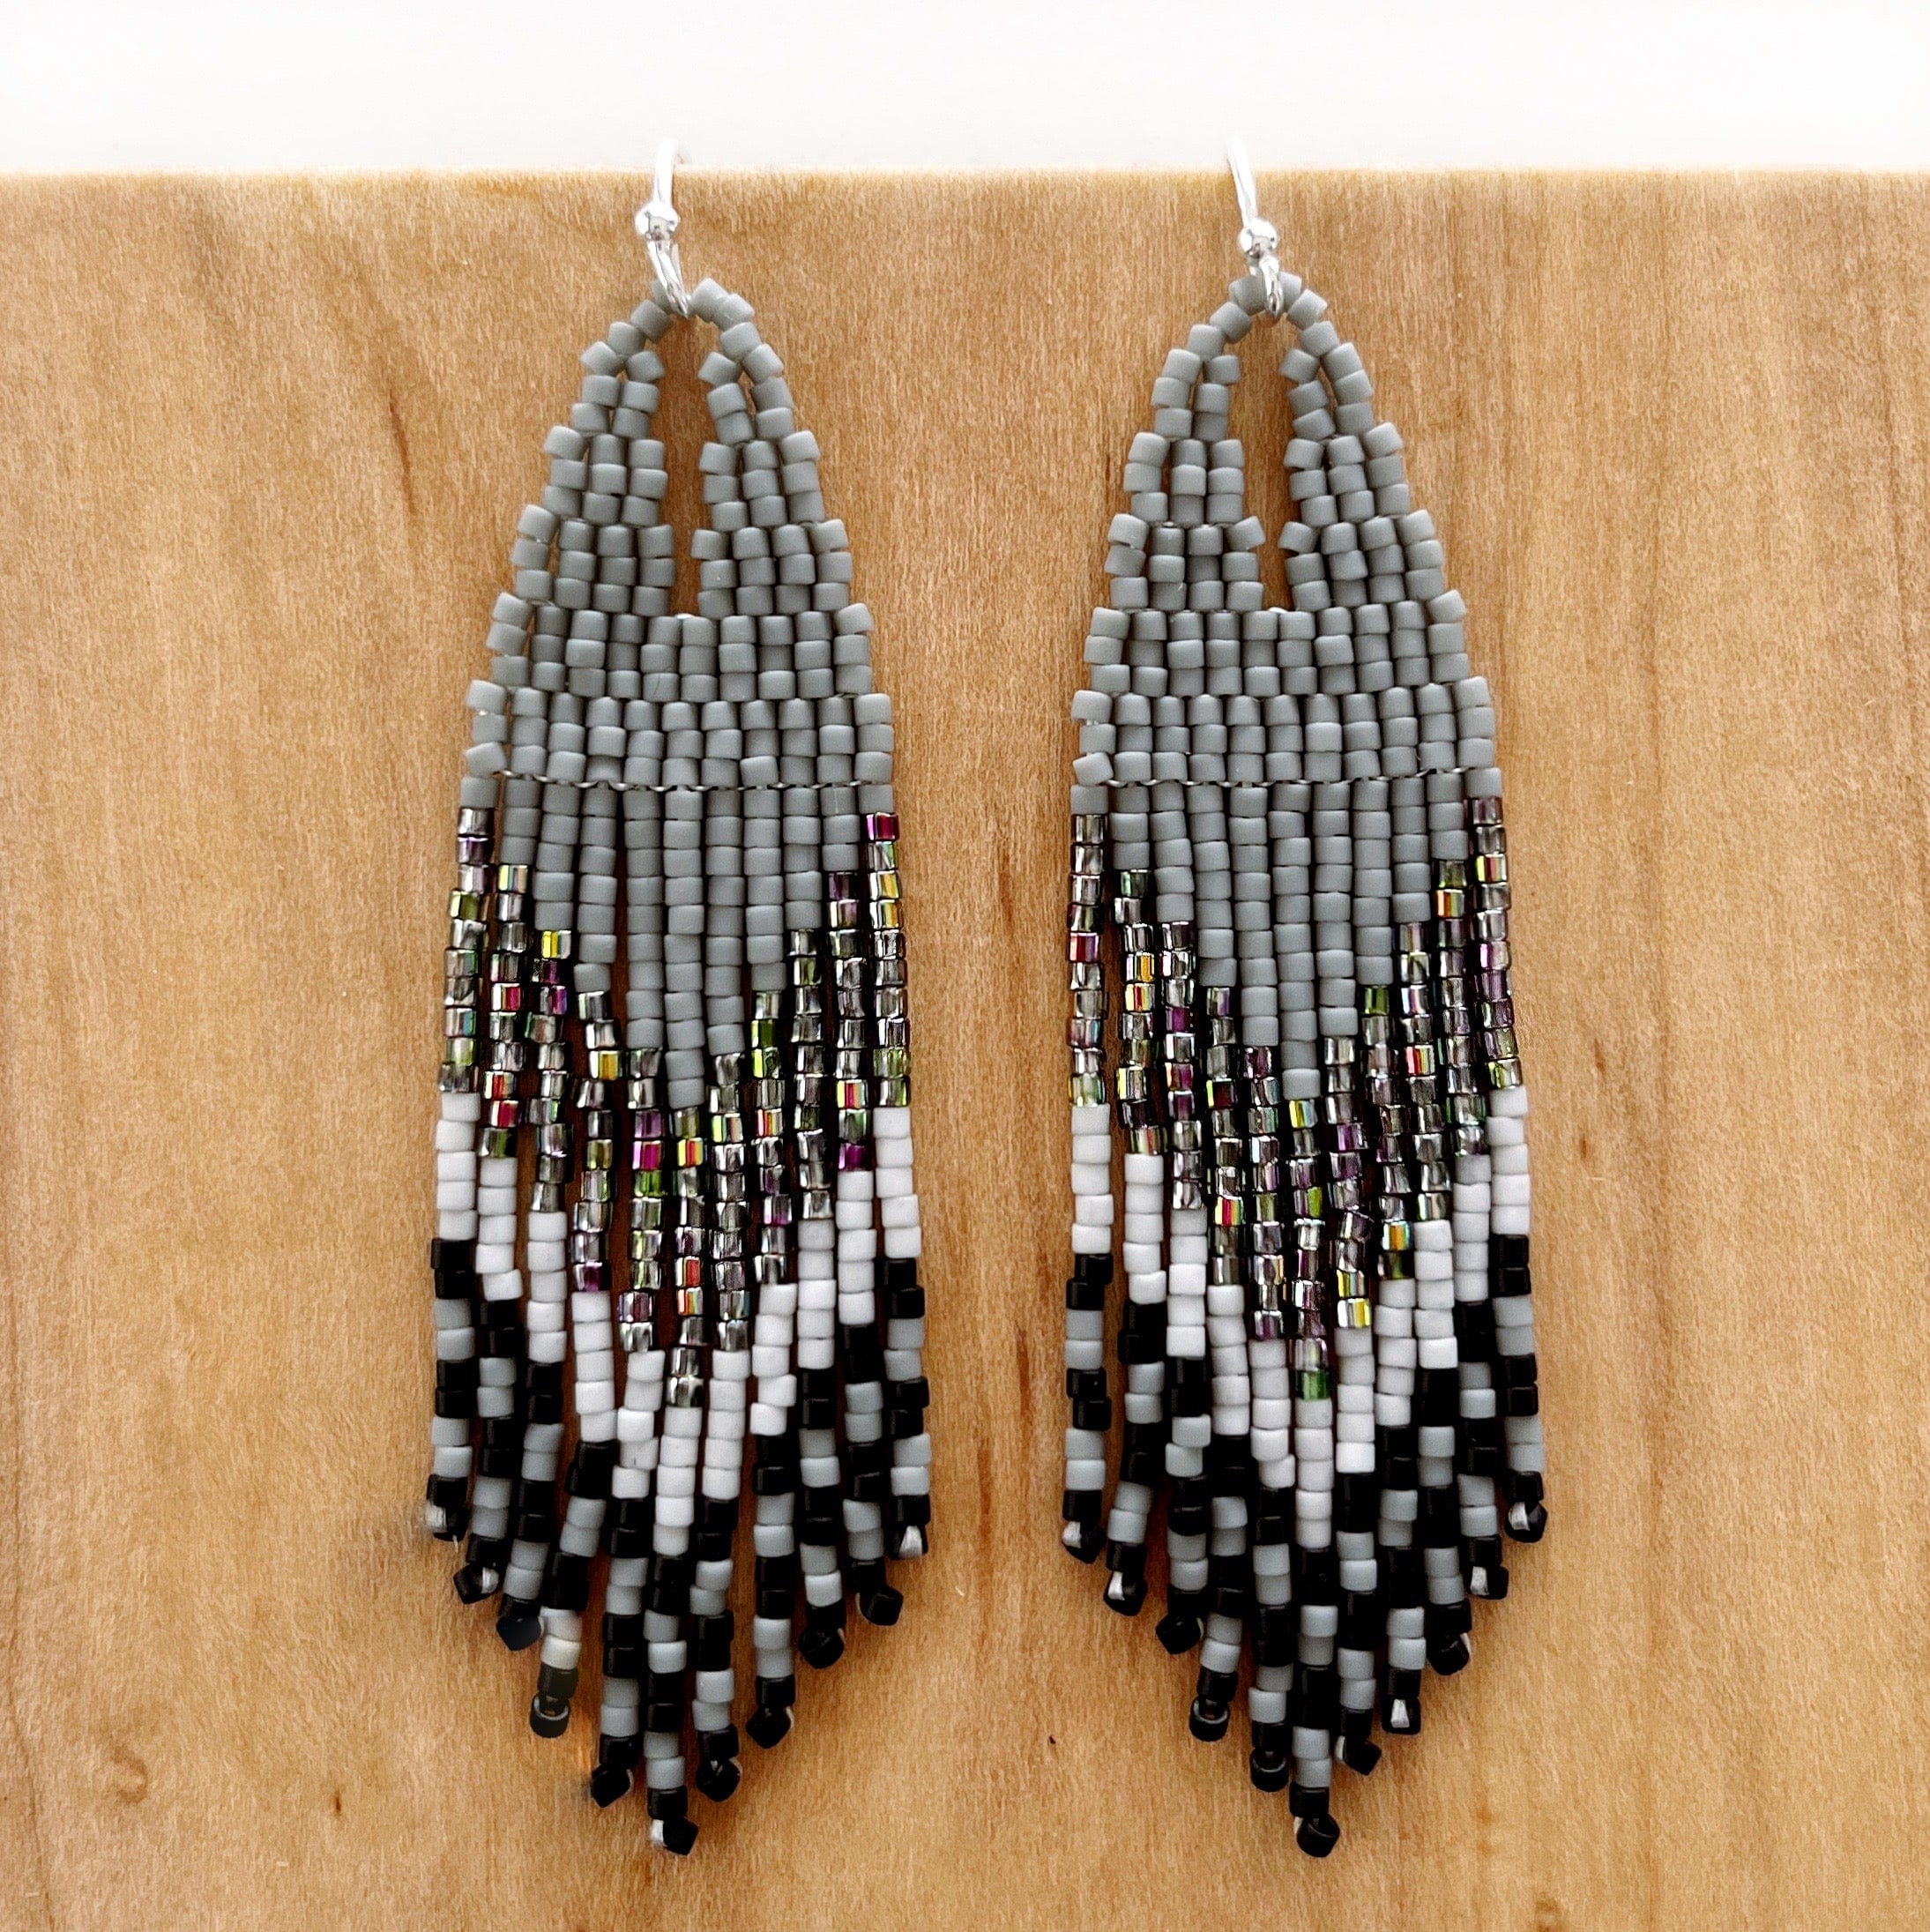 Lillie Nell Híshi Earrings in Pigeon